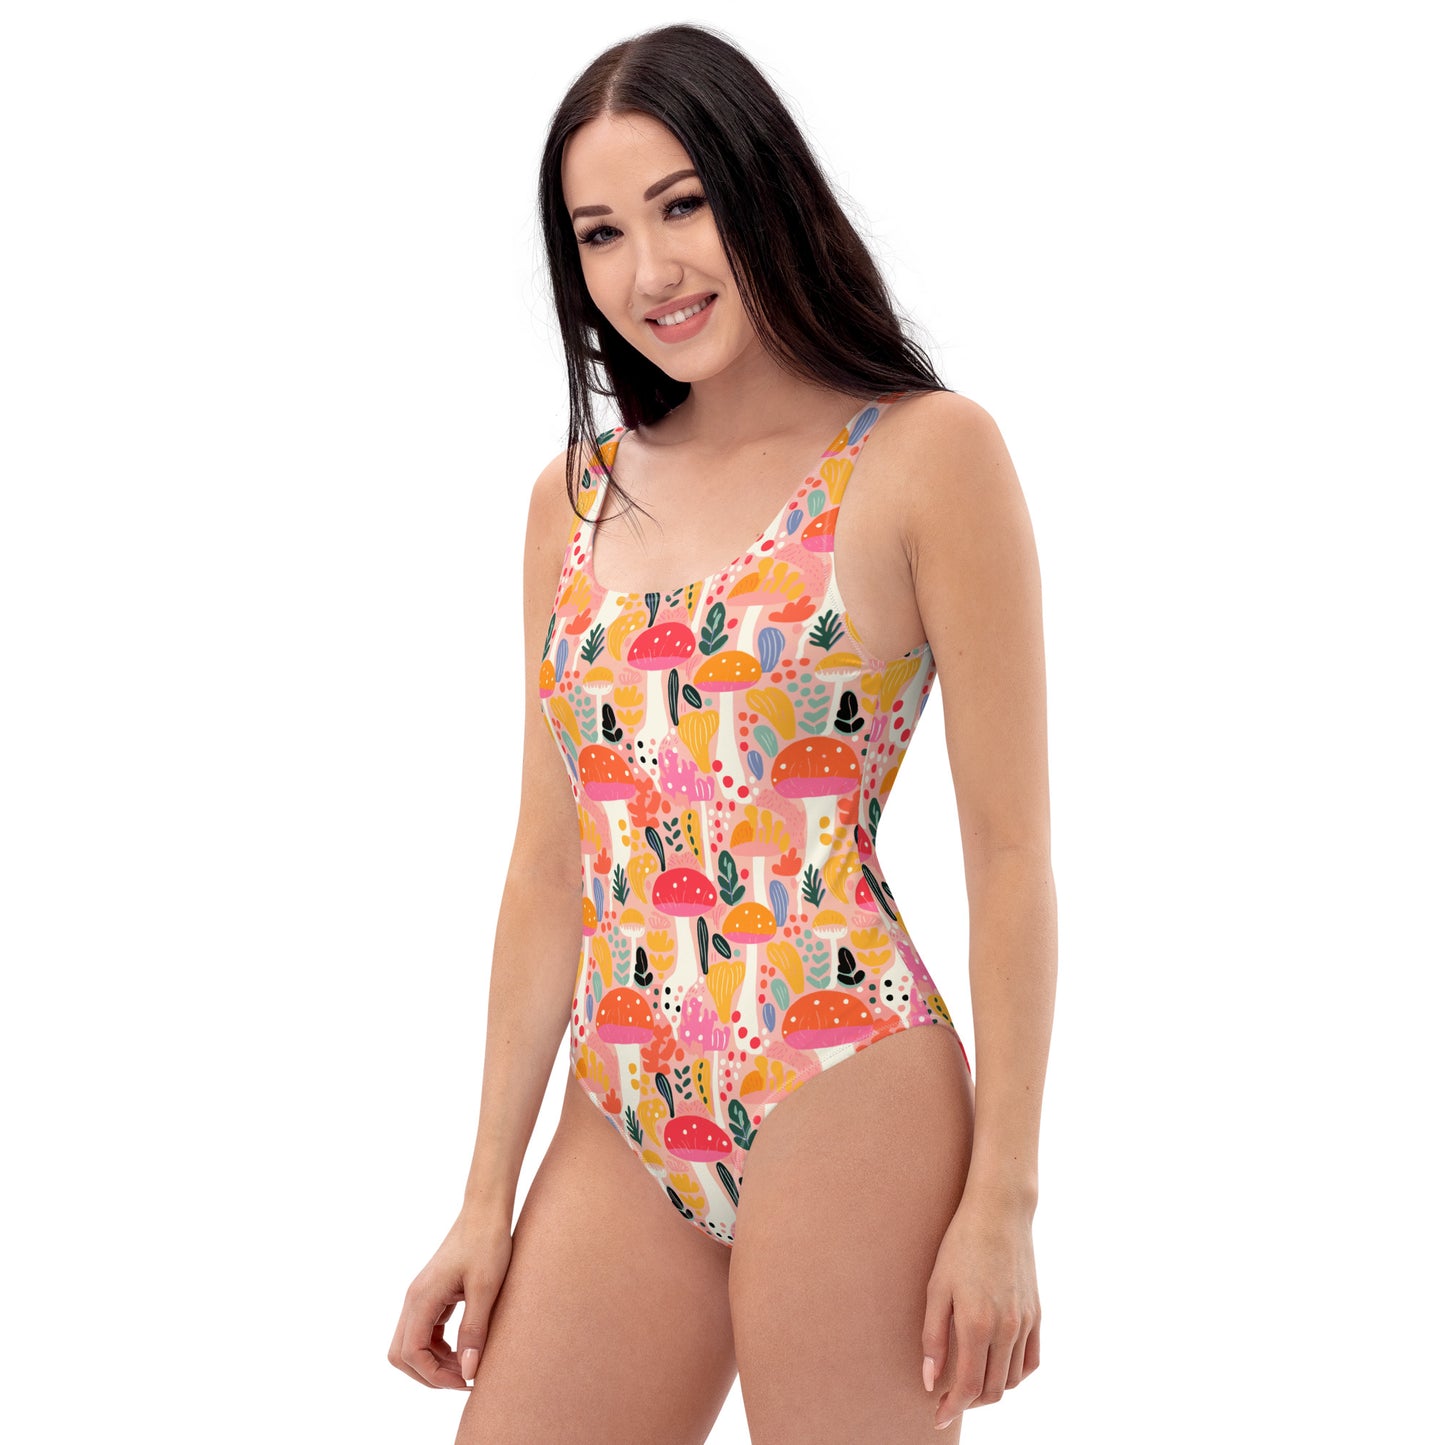 Cotswolds Classic One-Piece Swimsuit